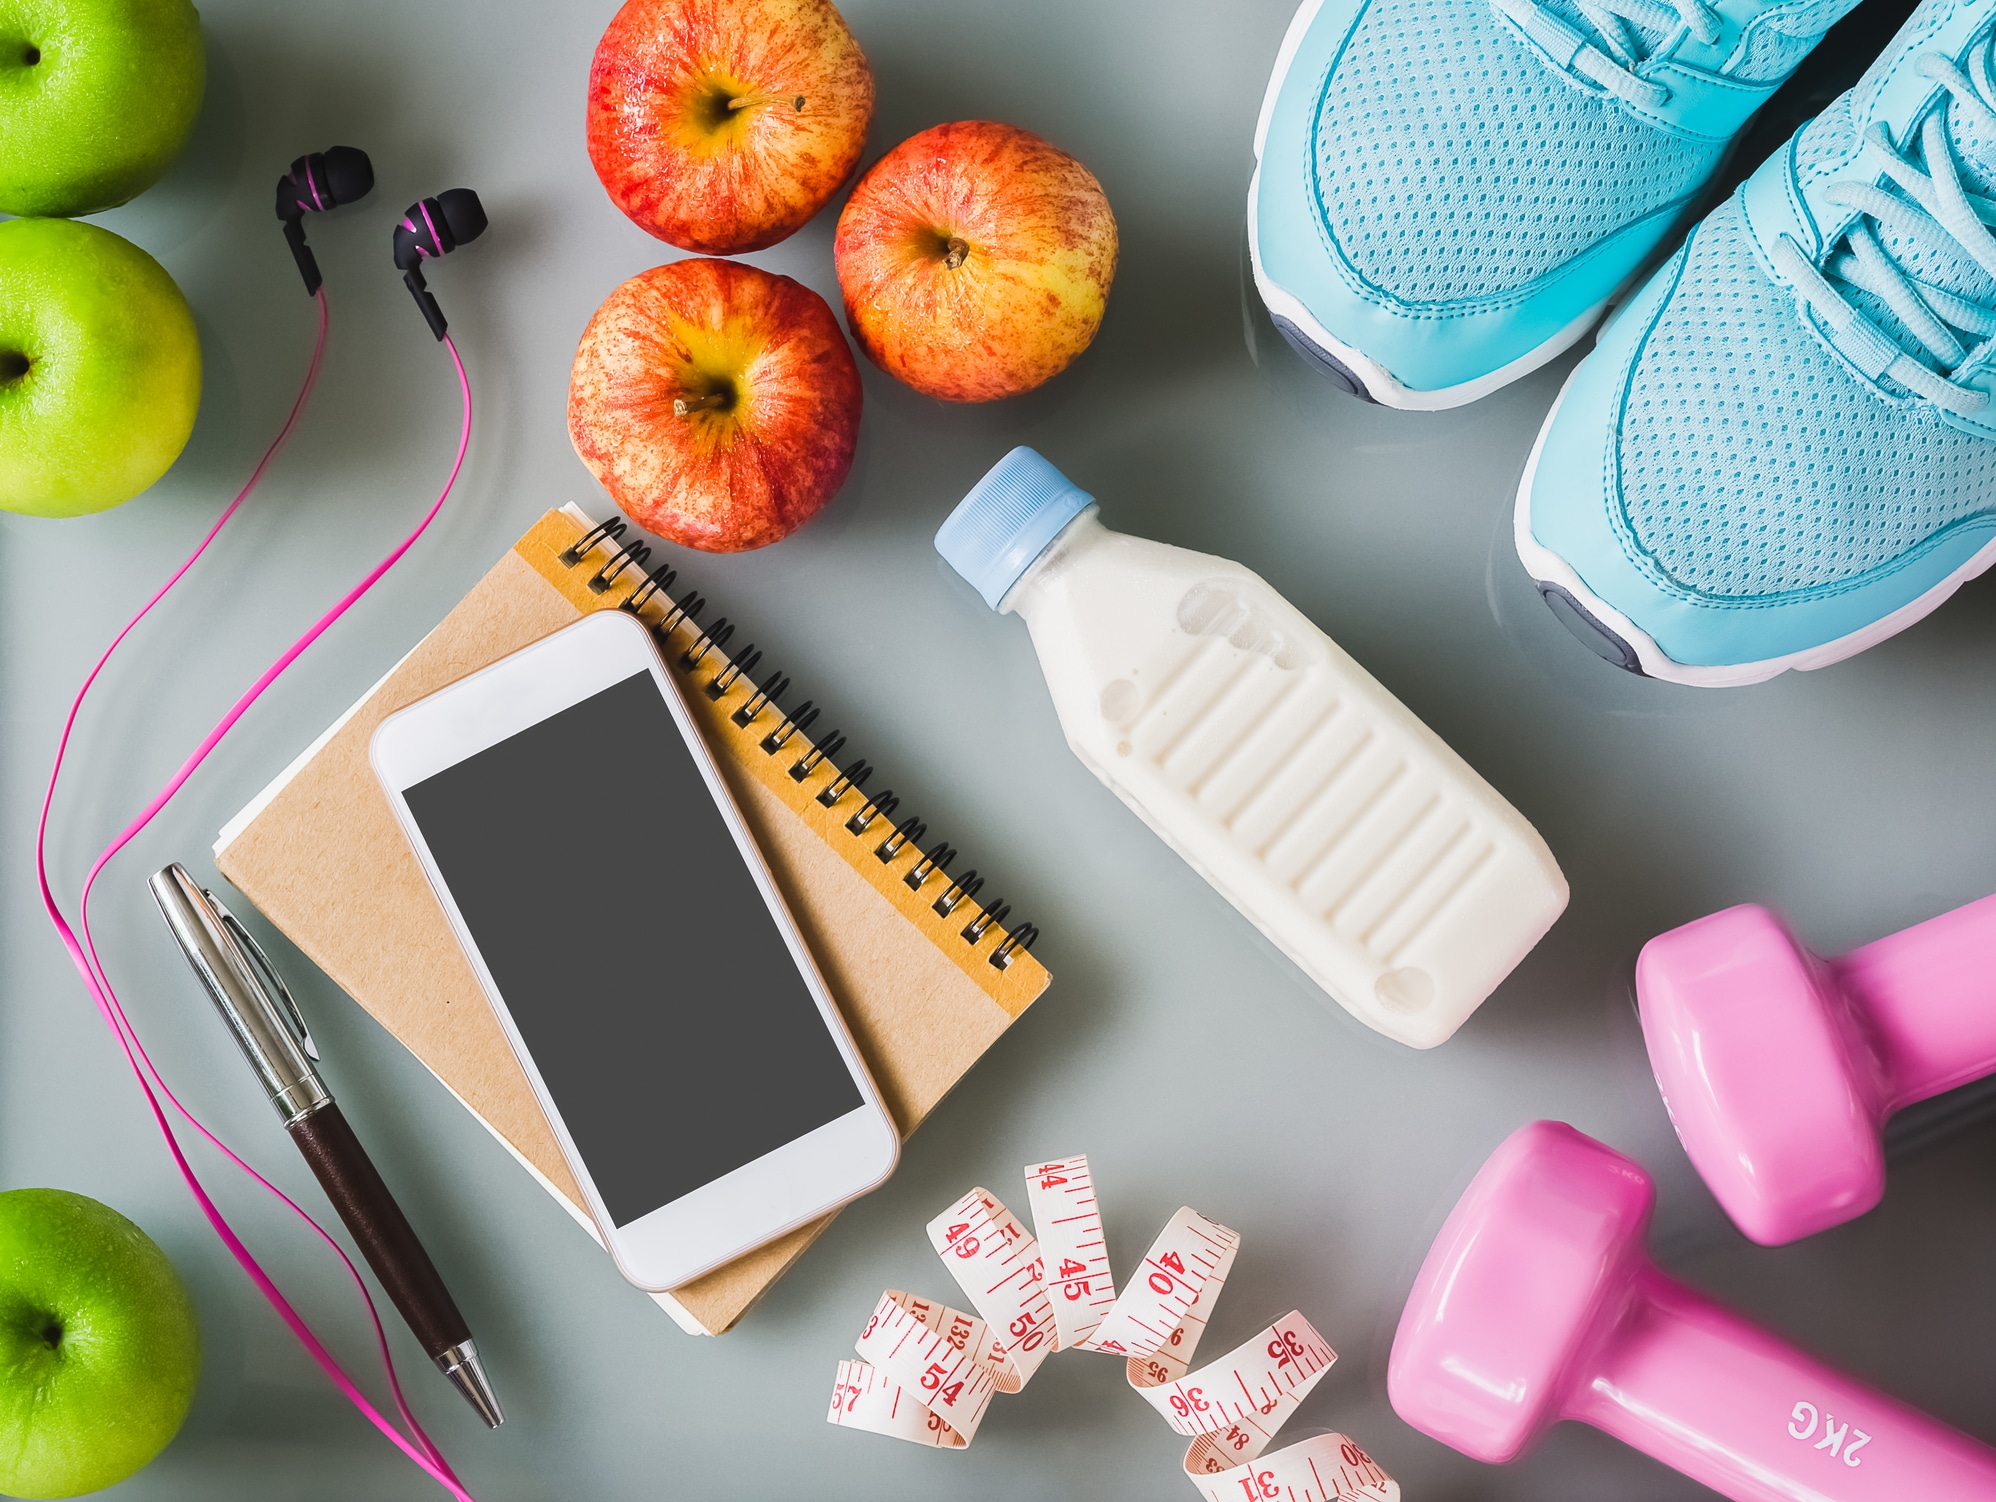 phone and milk with exercise equipment